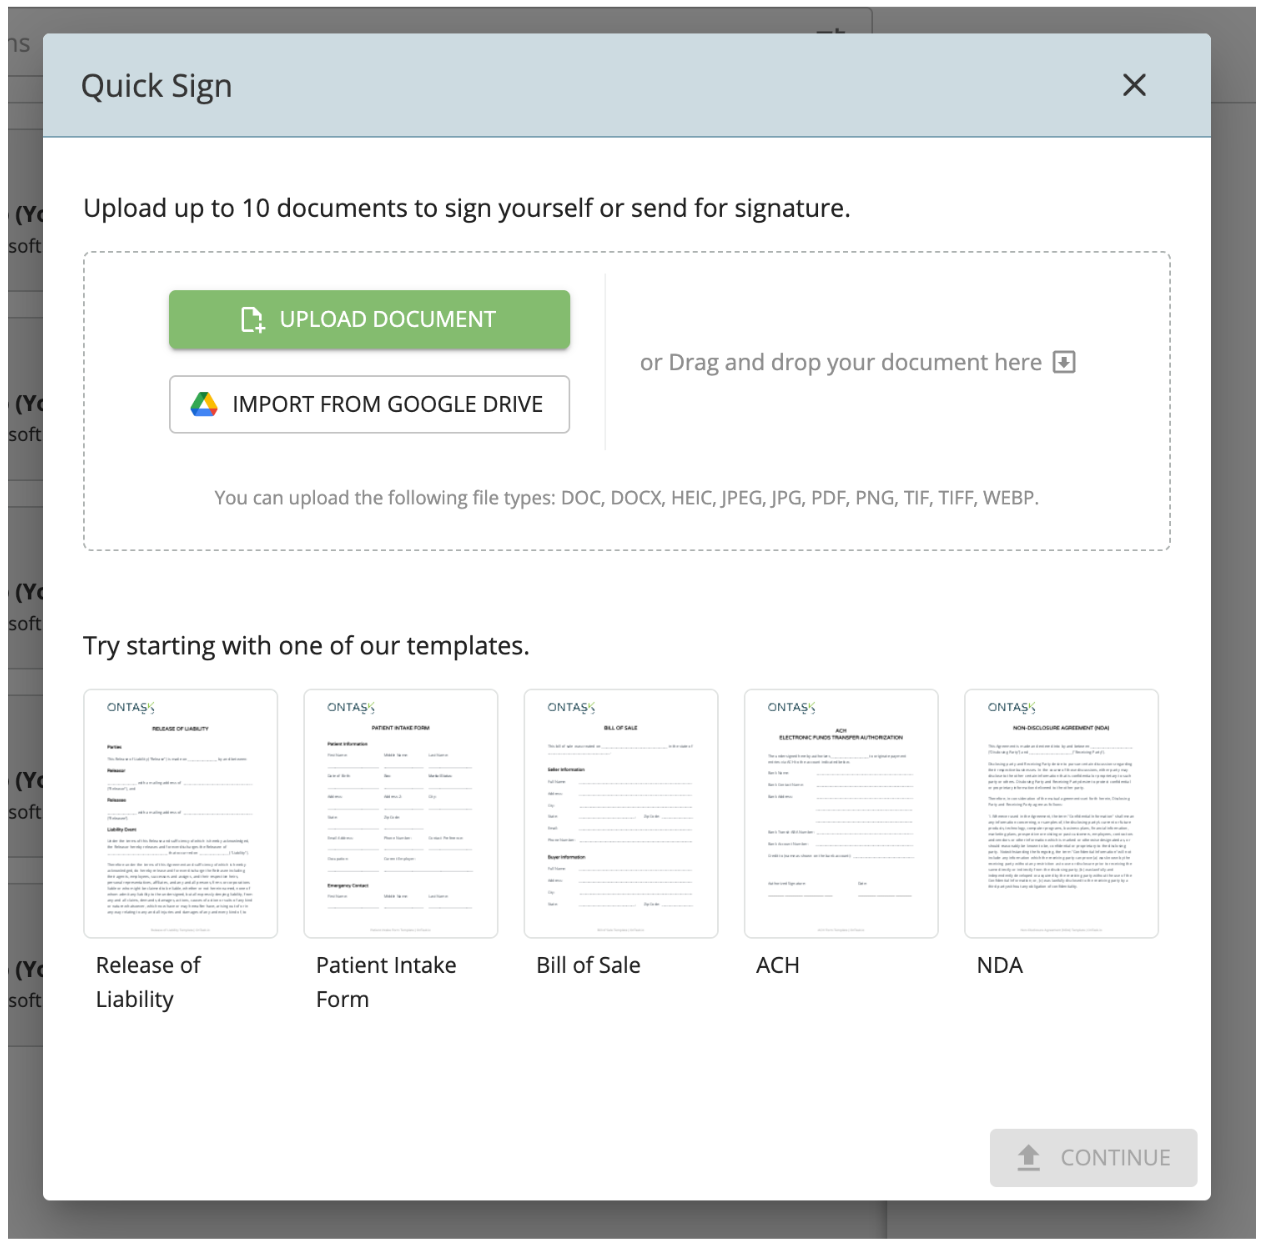 quick sign document uploader with import from google drive option